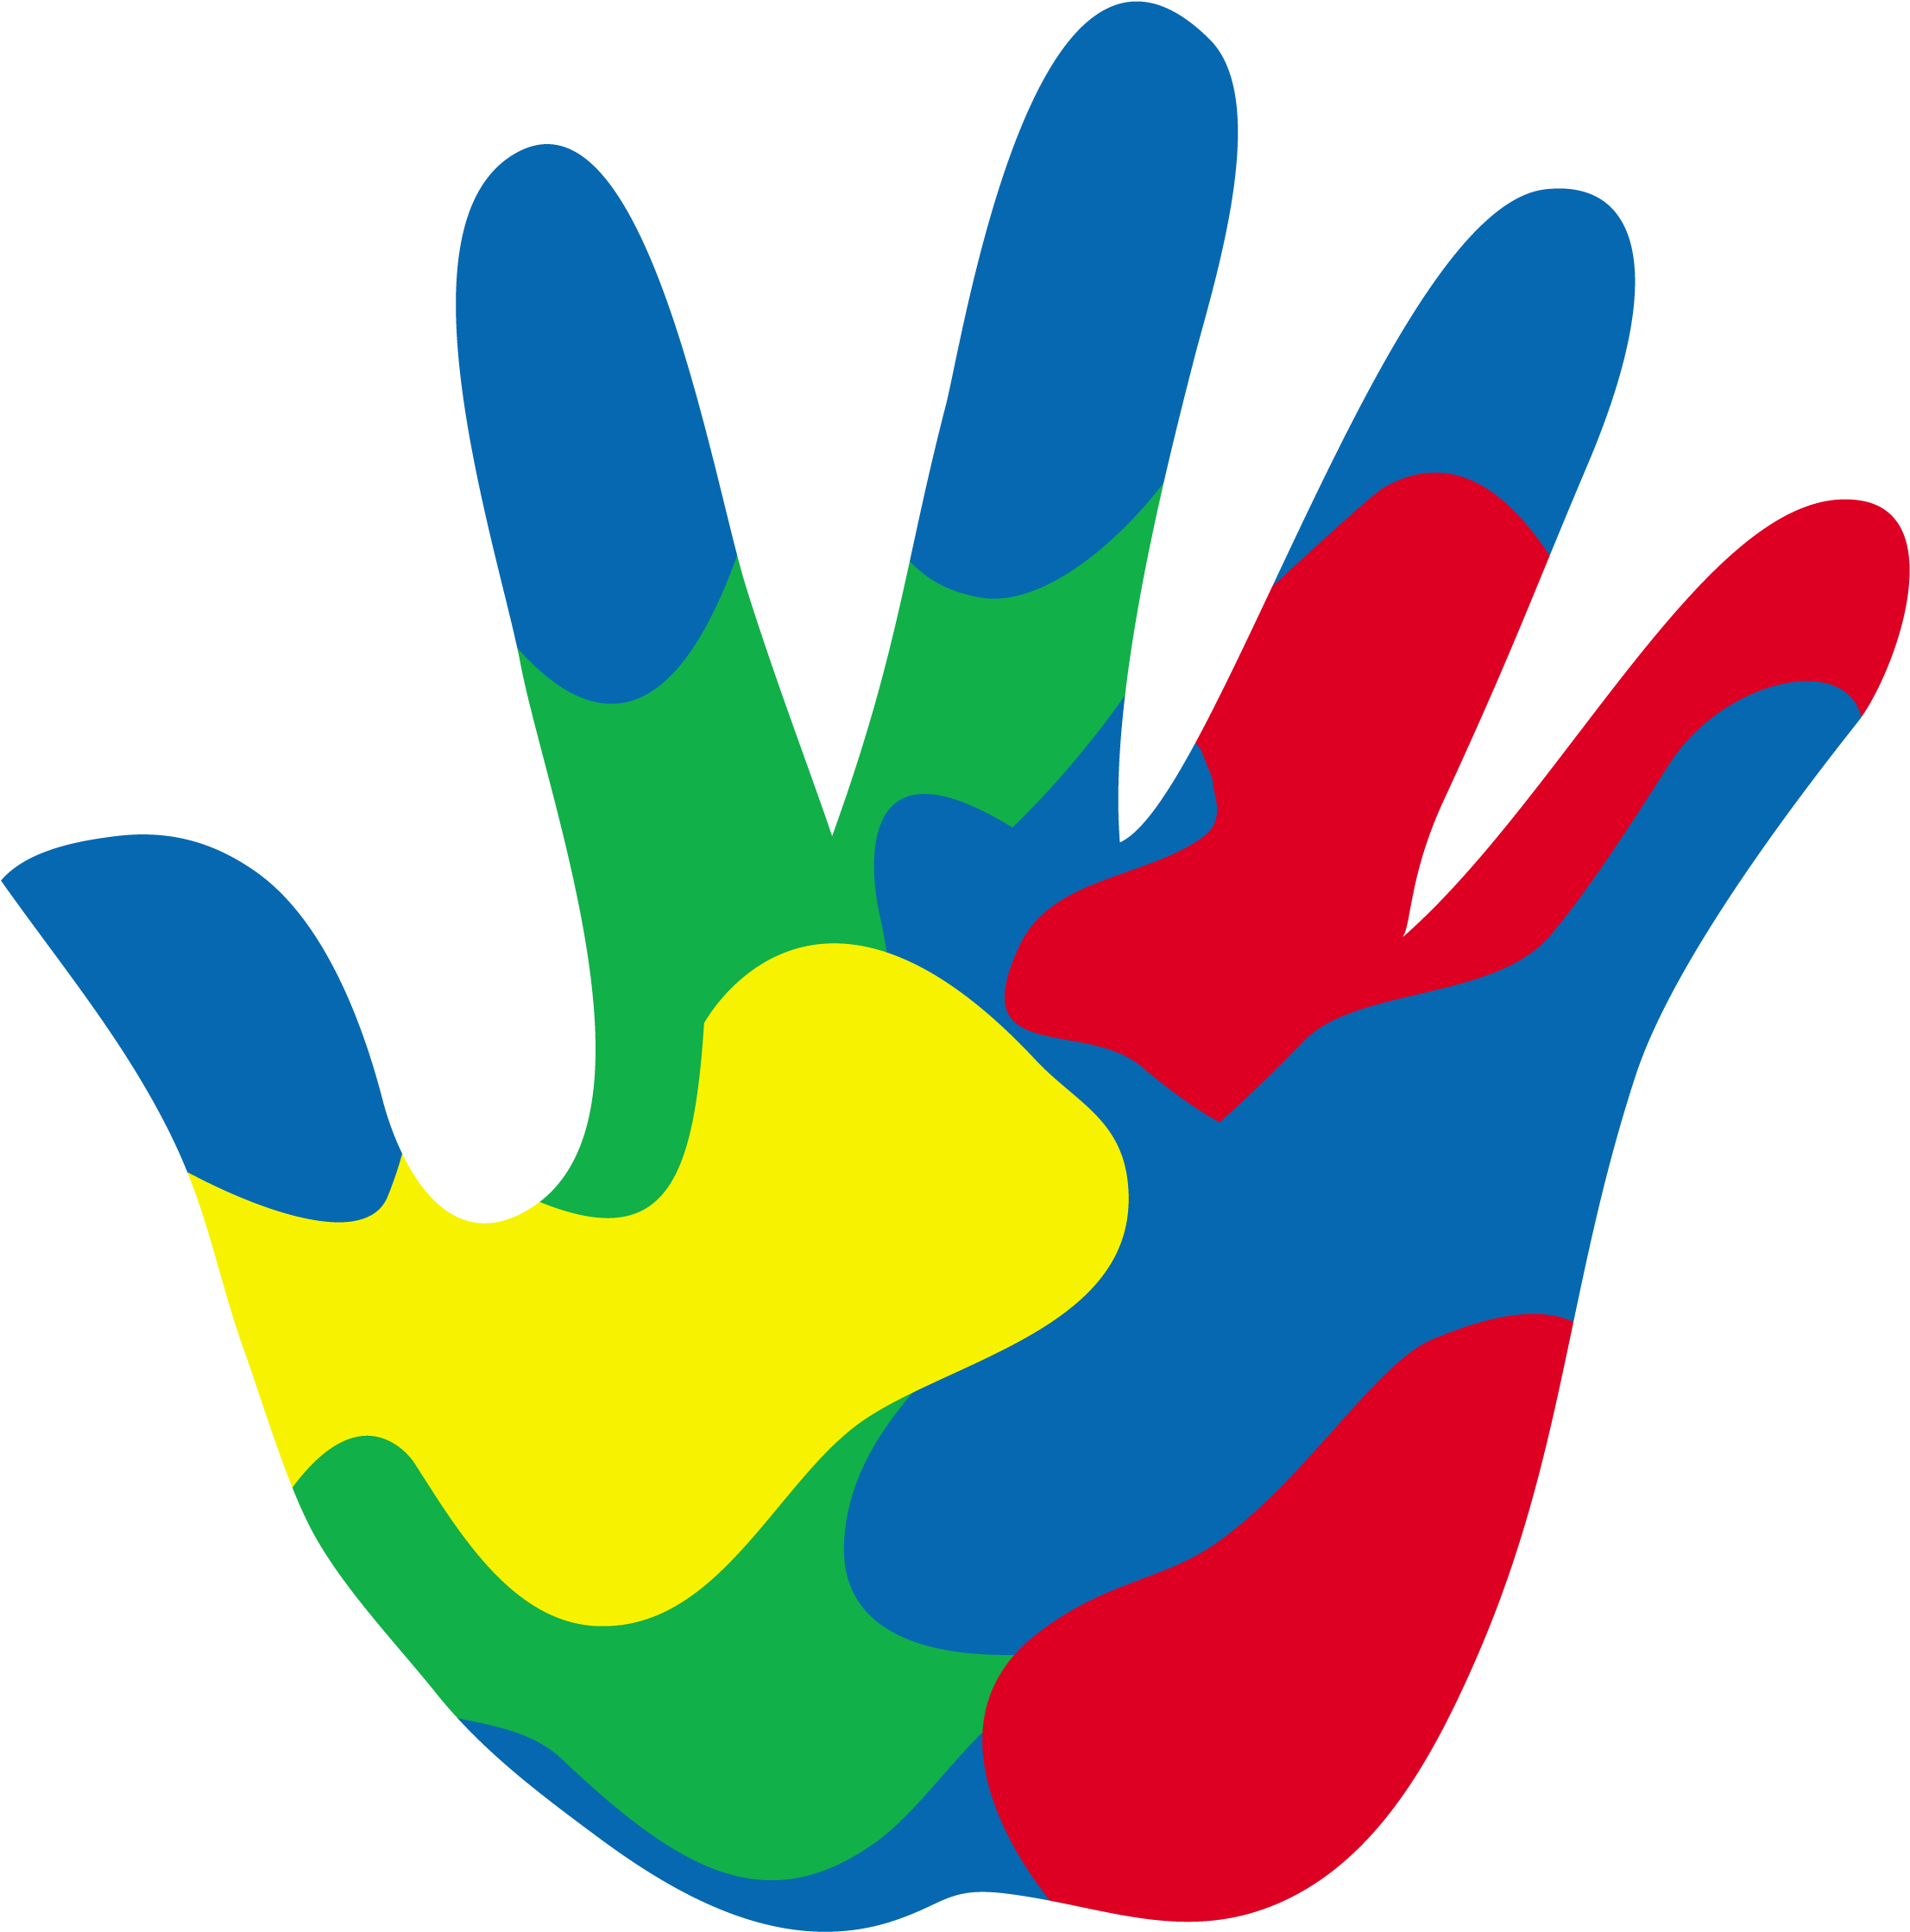 A Colorful Hand Print